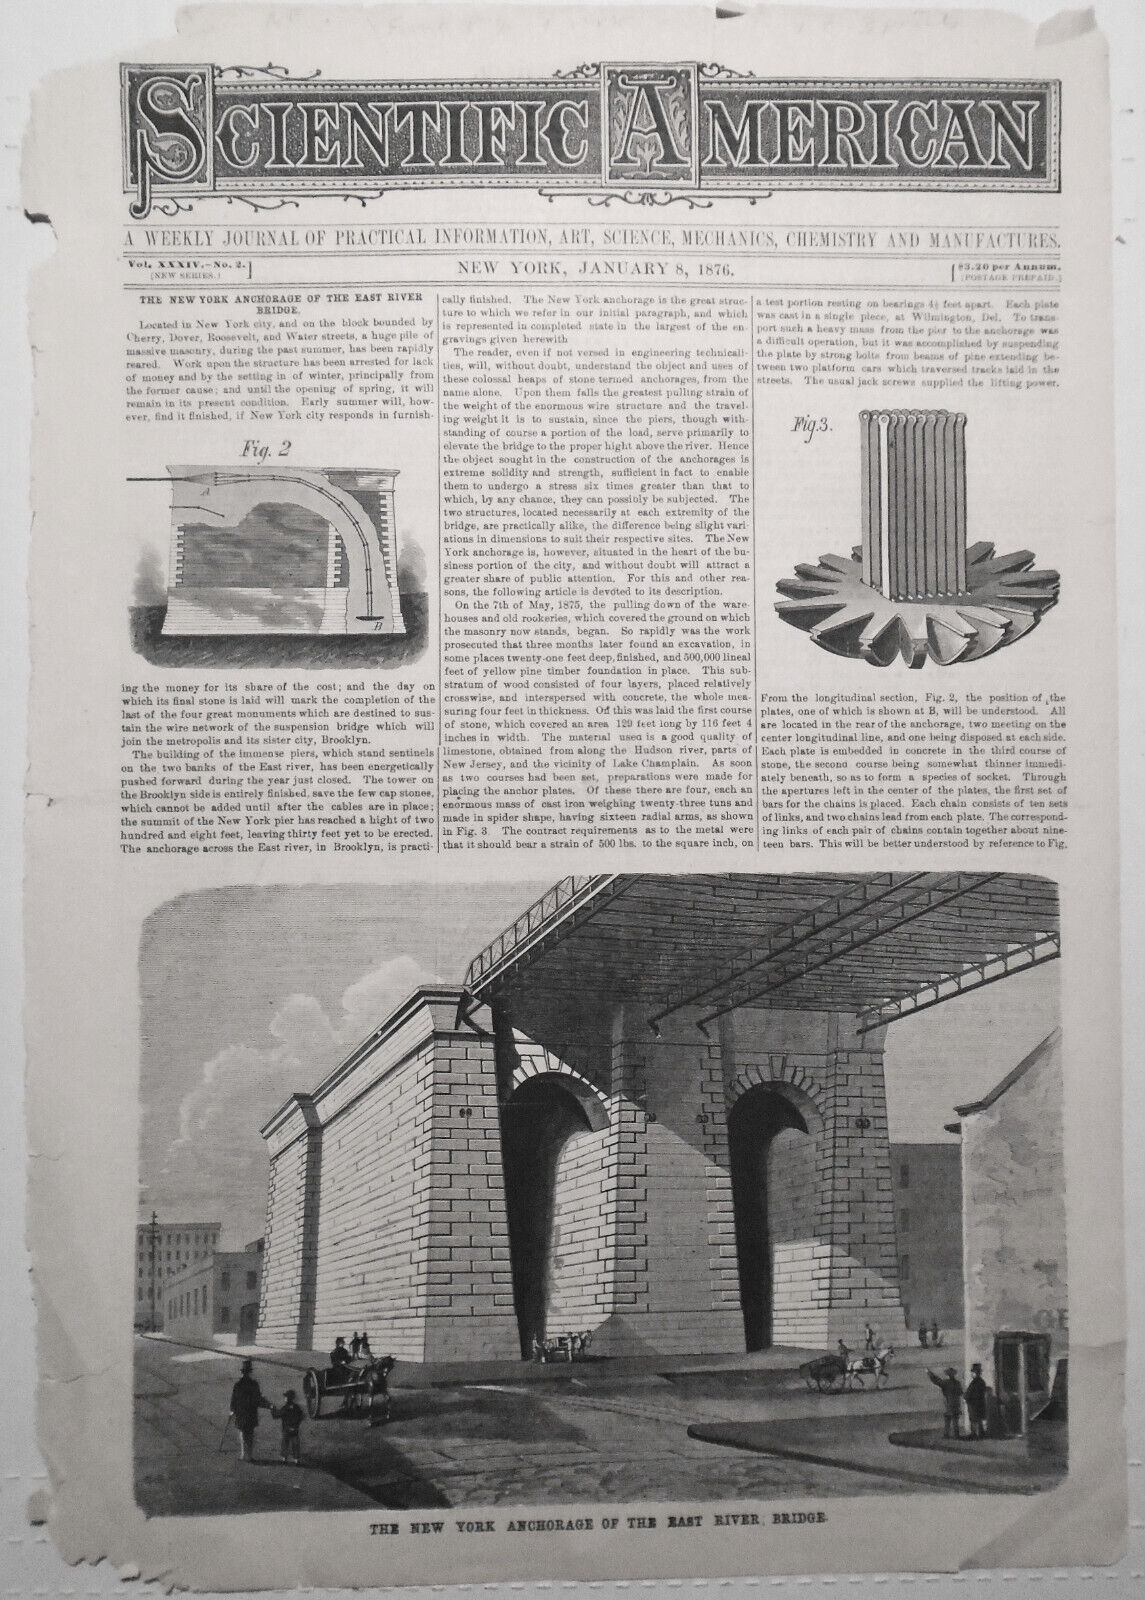 New York Anchorage Of The East River Bridge -Scientific American January 8, 1876